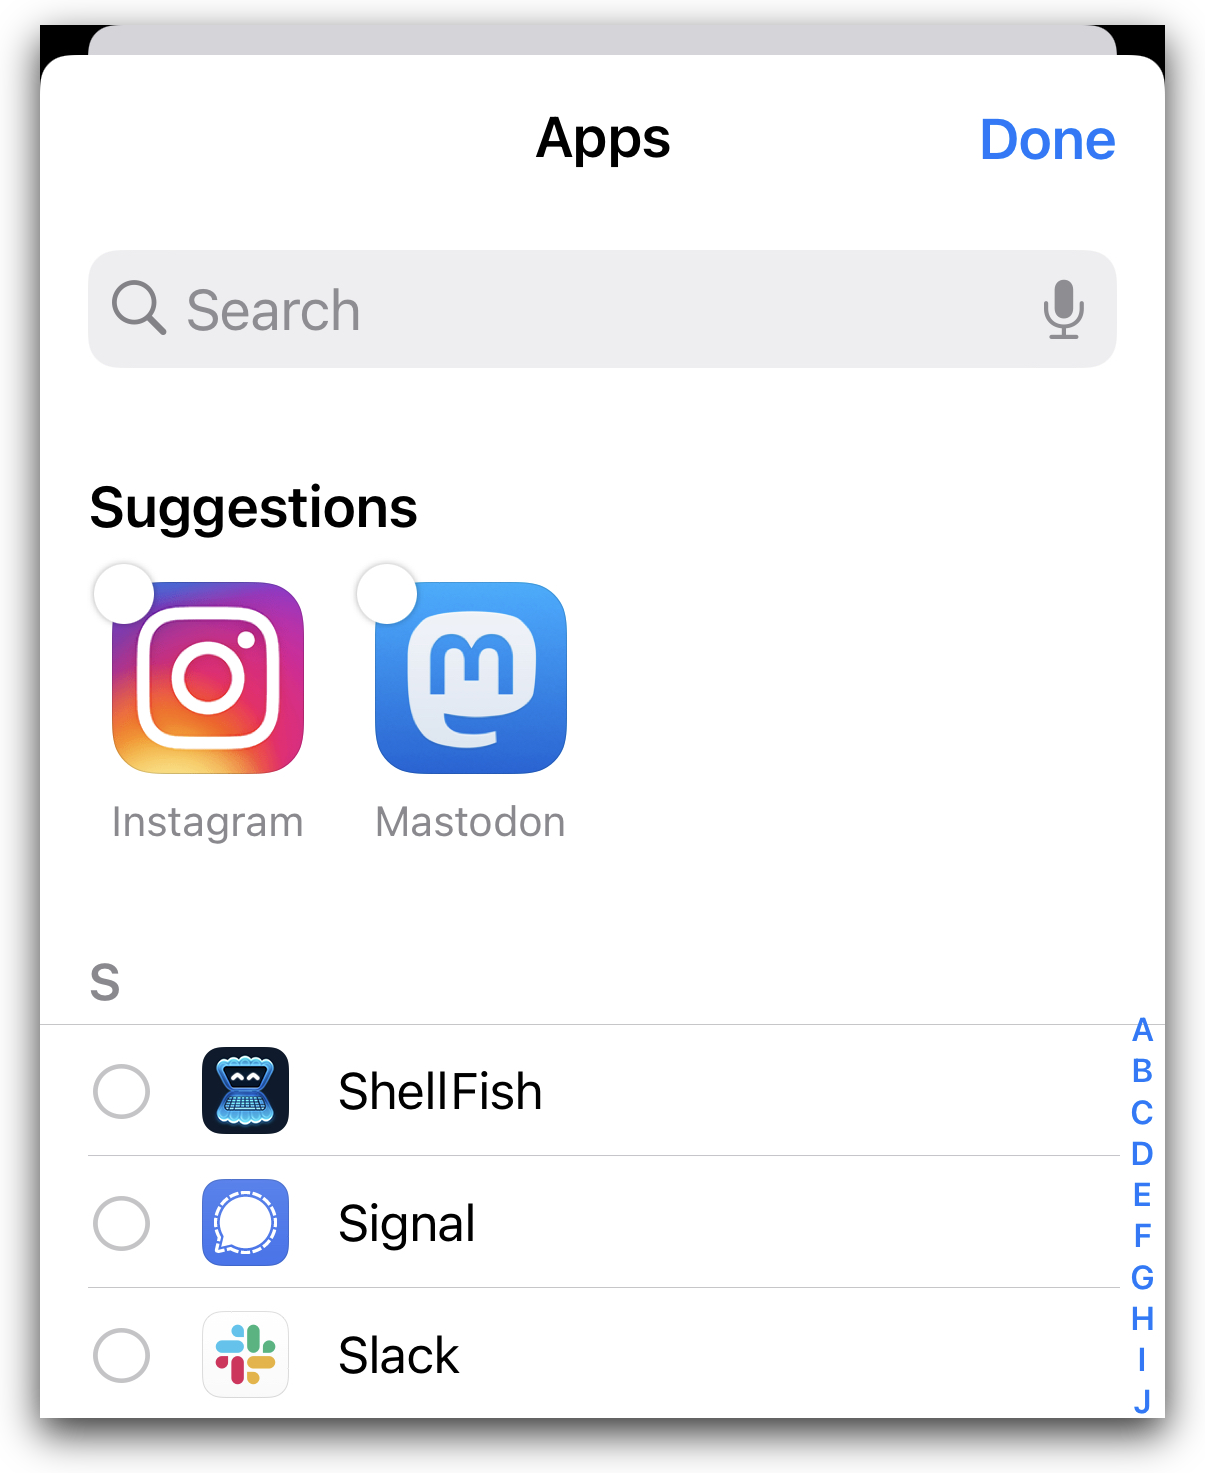 Shortcuts app is missing when configuring a focus mode's allowed apps